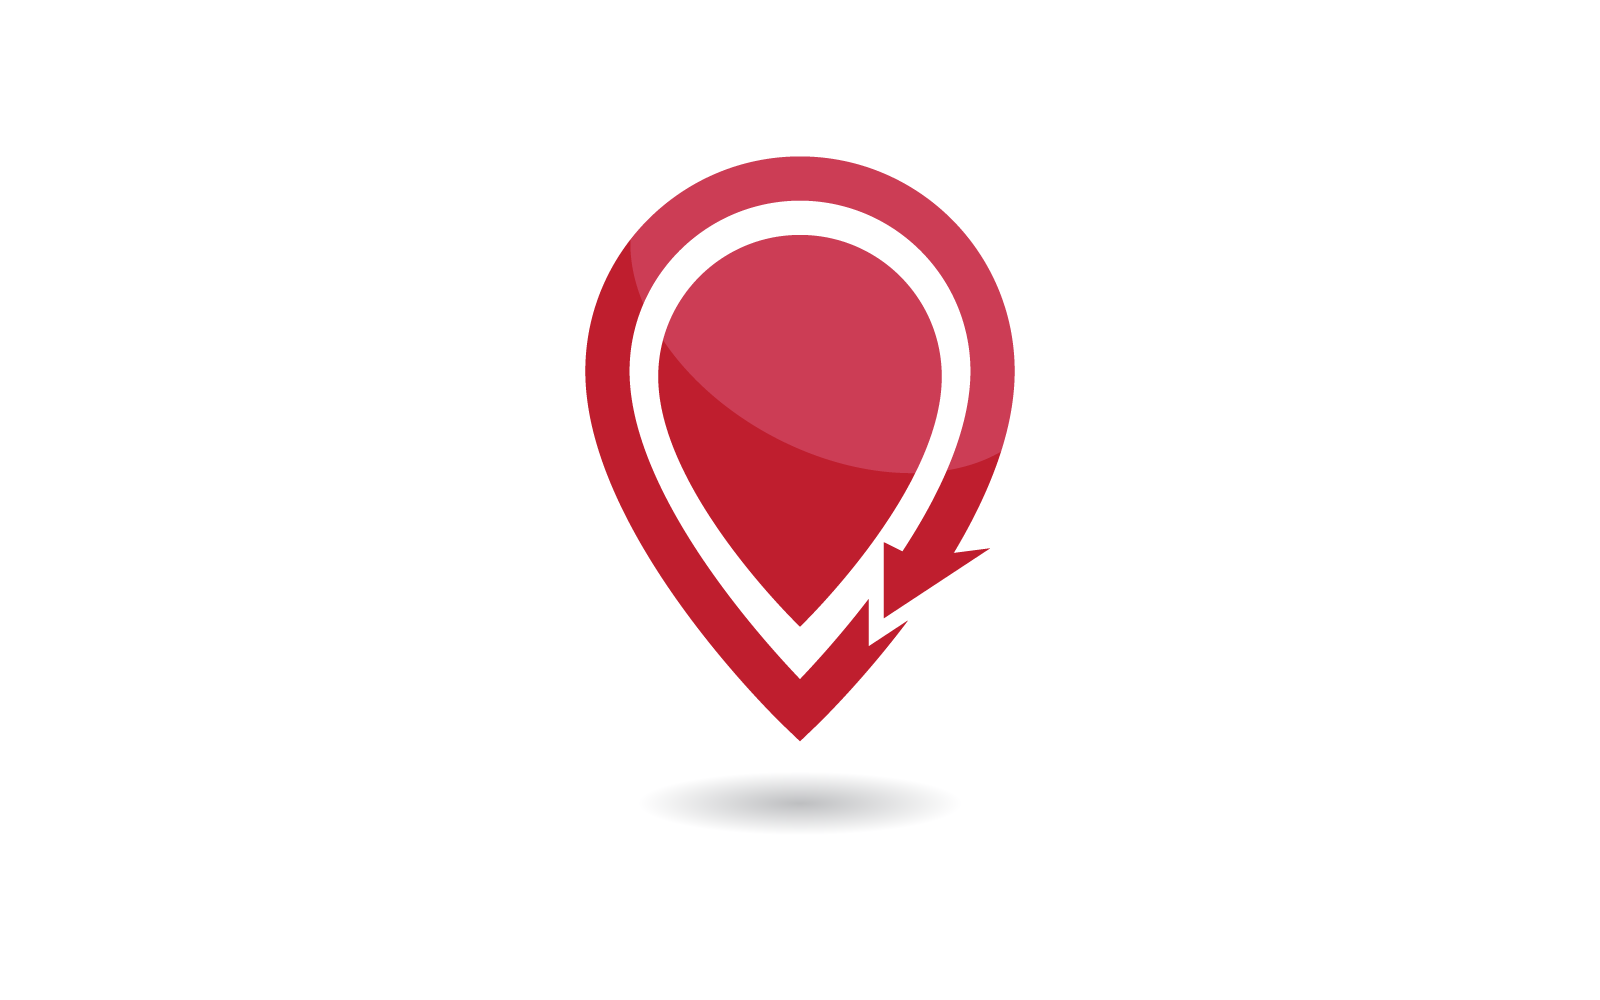 Location point sign and symbol Logo vector icon template